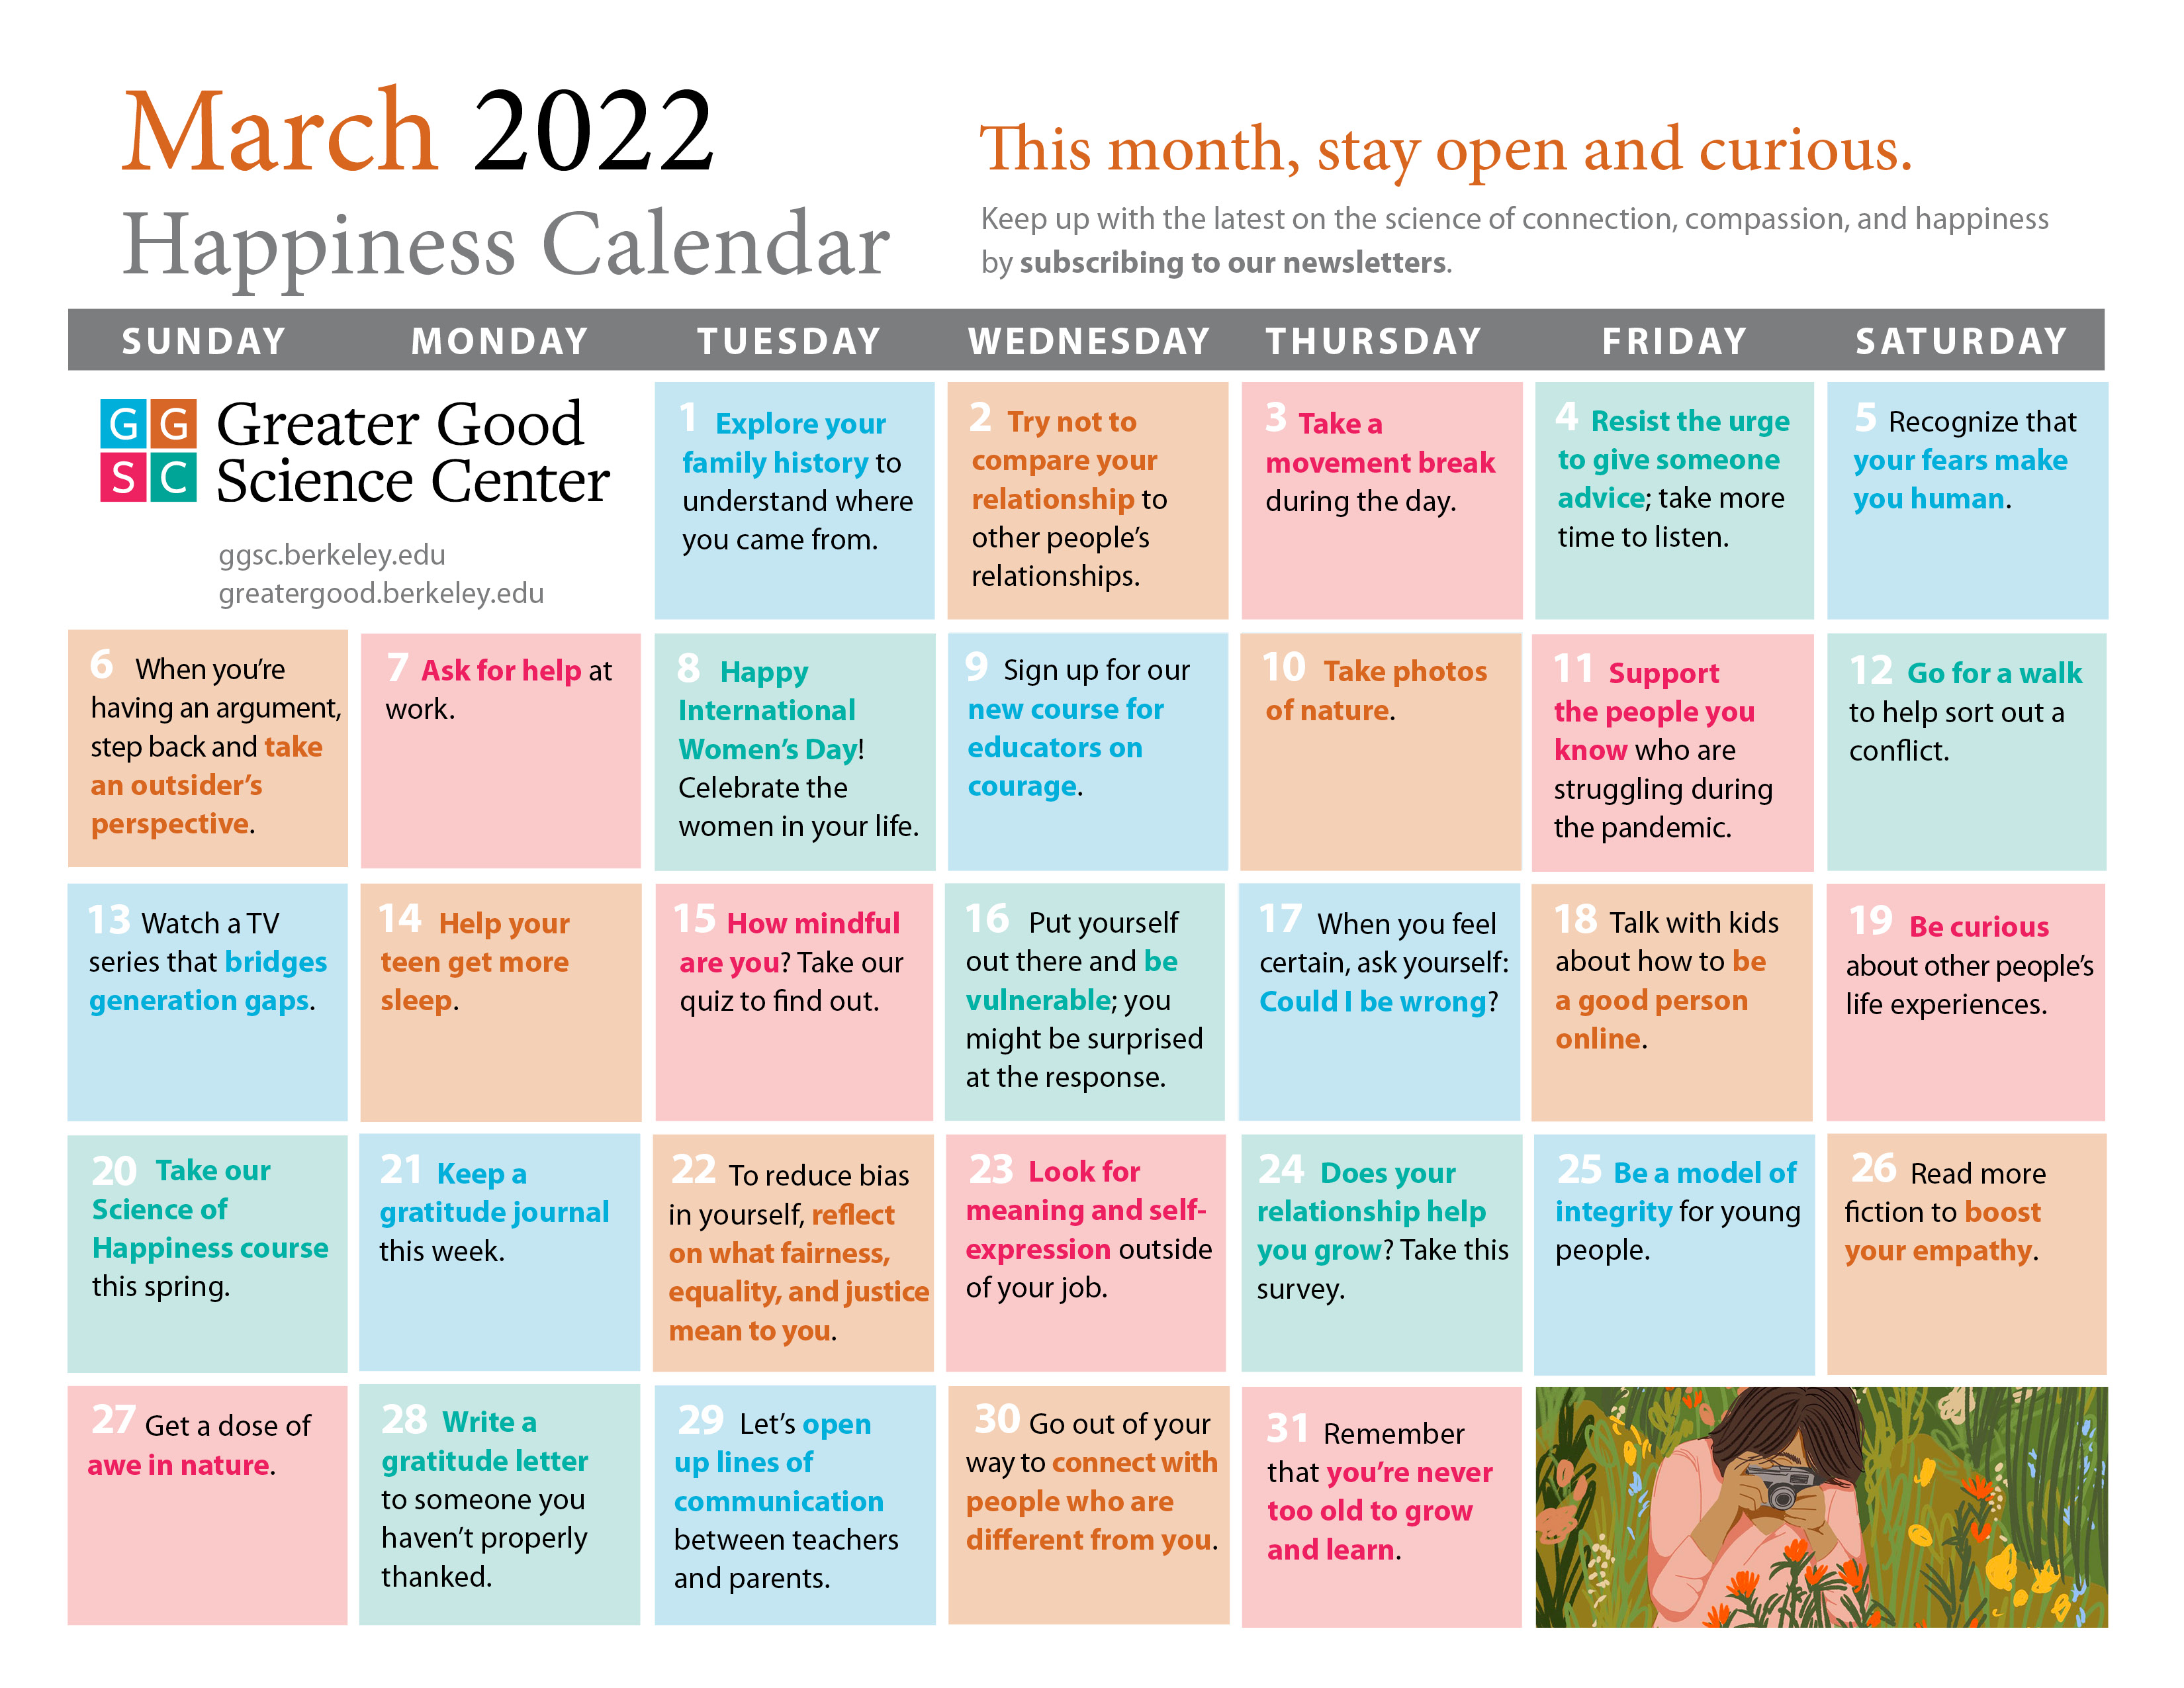 March 2022 happiness calendar